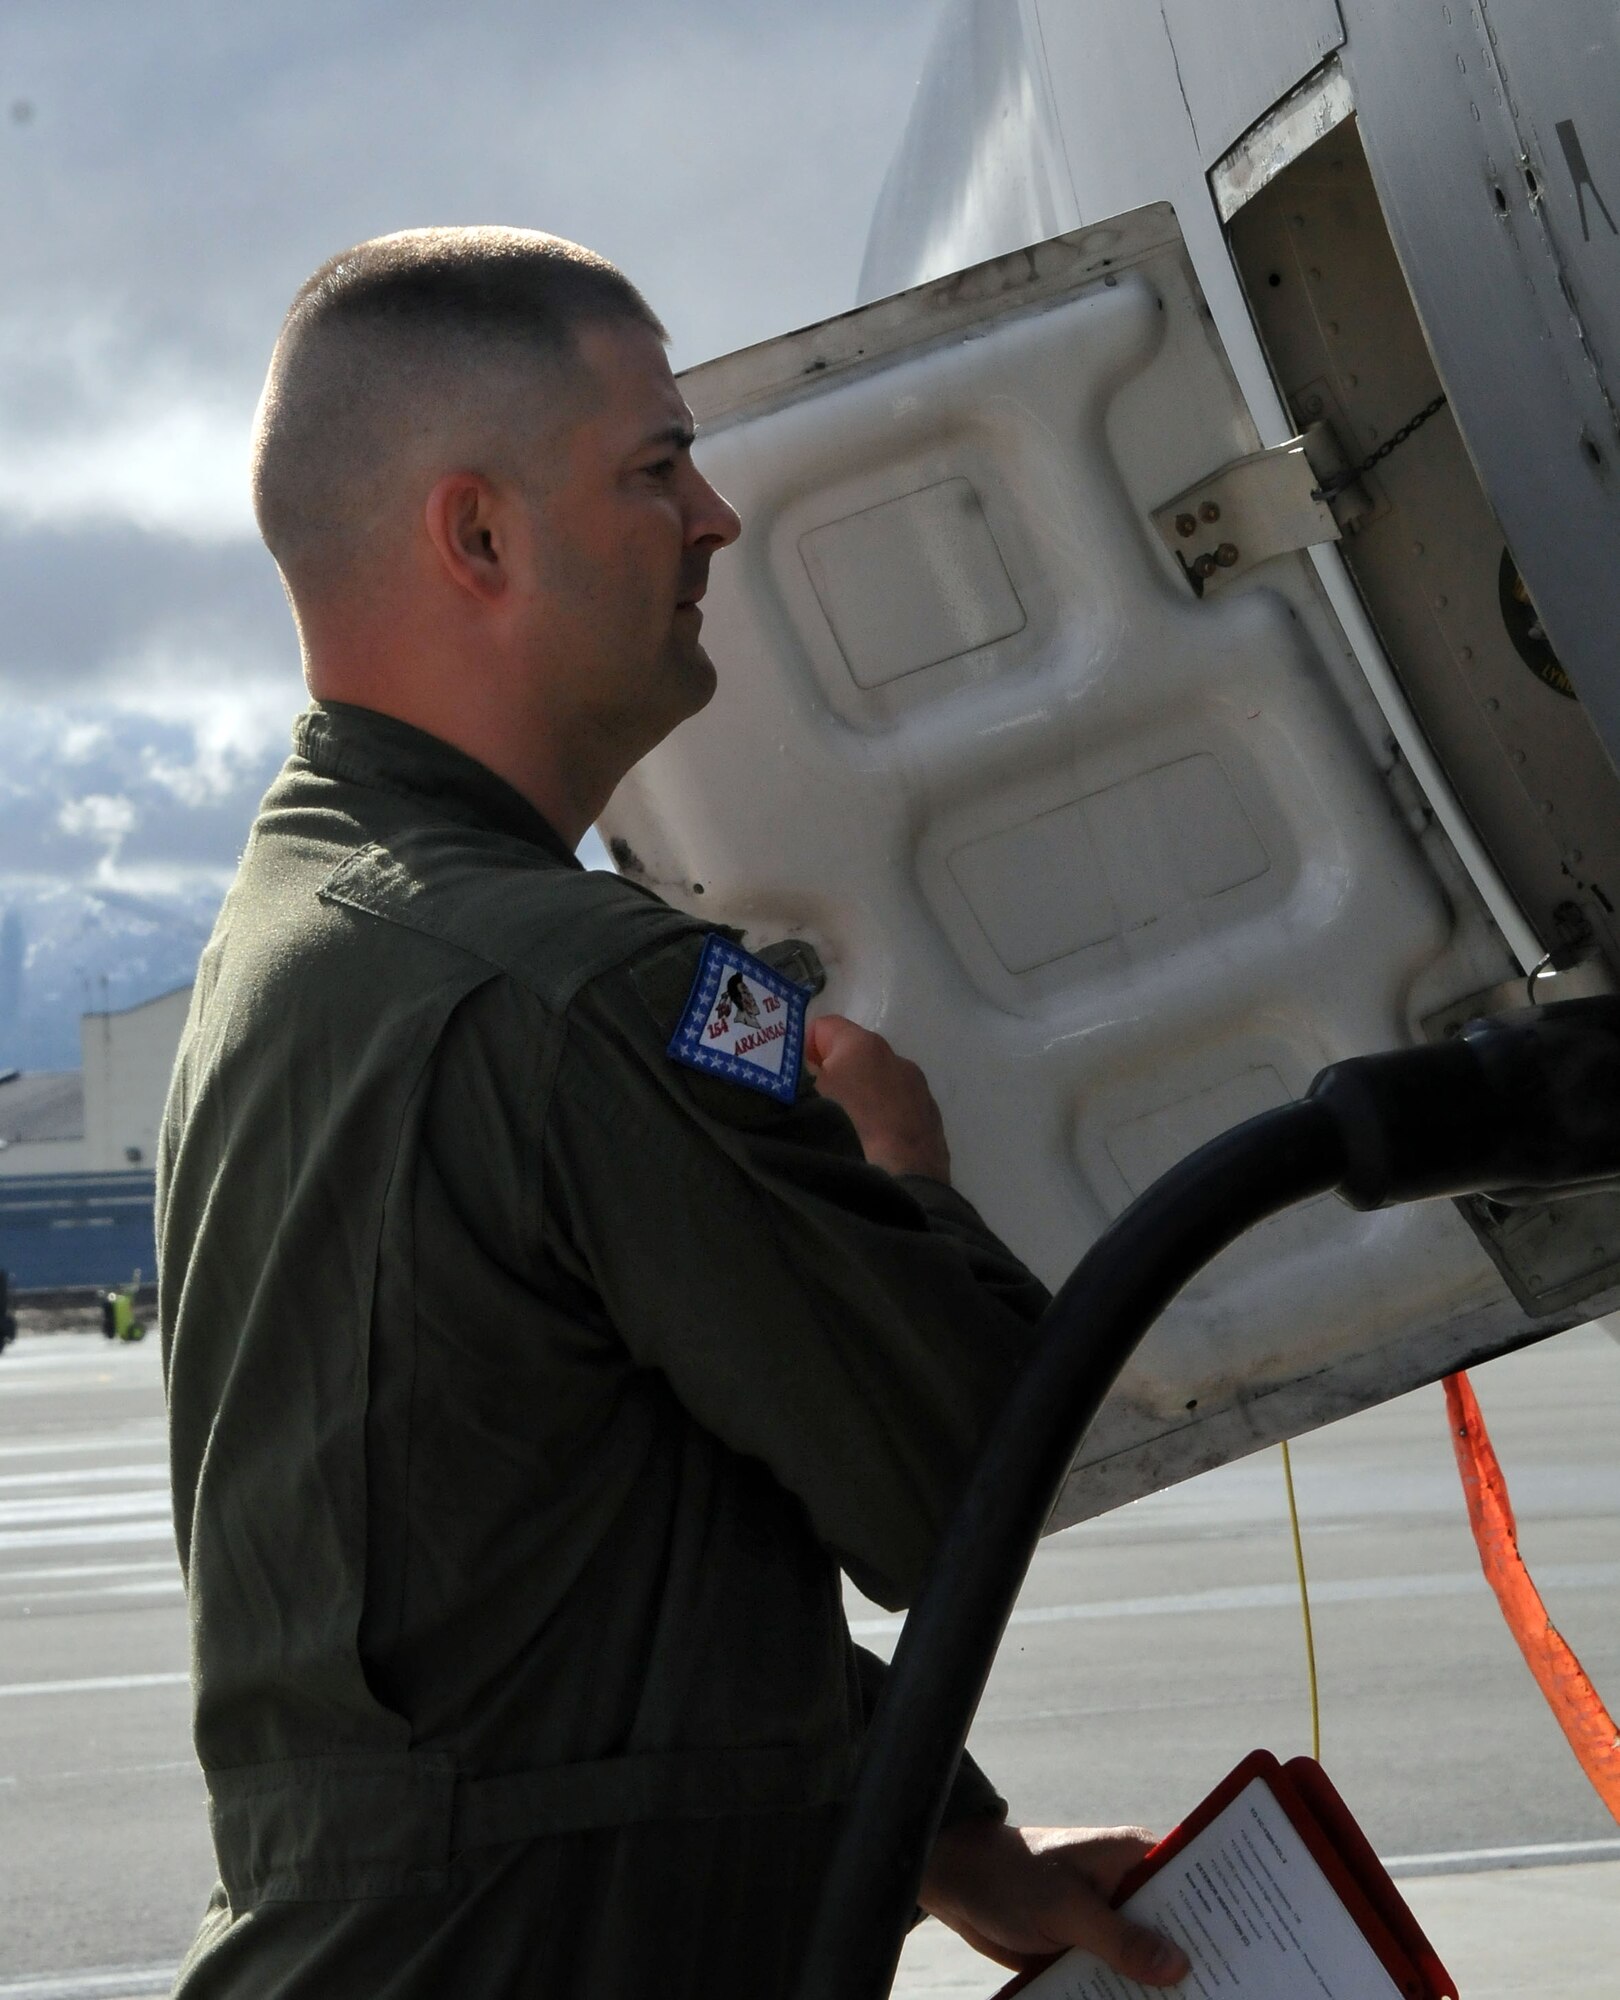 JOINT BASE ELMENDORF-RICHARDSON, Alaska -- Tech. Sgt. Brian Cannon, a flight engineer with the Arkansas Air National Guard's 154th Training Squadron, inspects a C-130 cargo aircraft on the flightline here May 23, 2013. The C-130 was one of three being transferred from the Alaska Air National Guard's 176 Wing to the Ohio Air National Guard's 179th Airlift Wing. National Guard photo by Staff Sgt. N. Alicia Goldberger. 